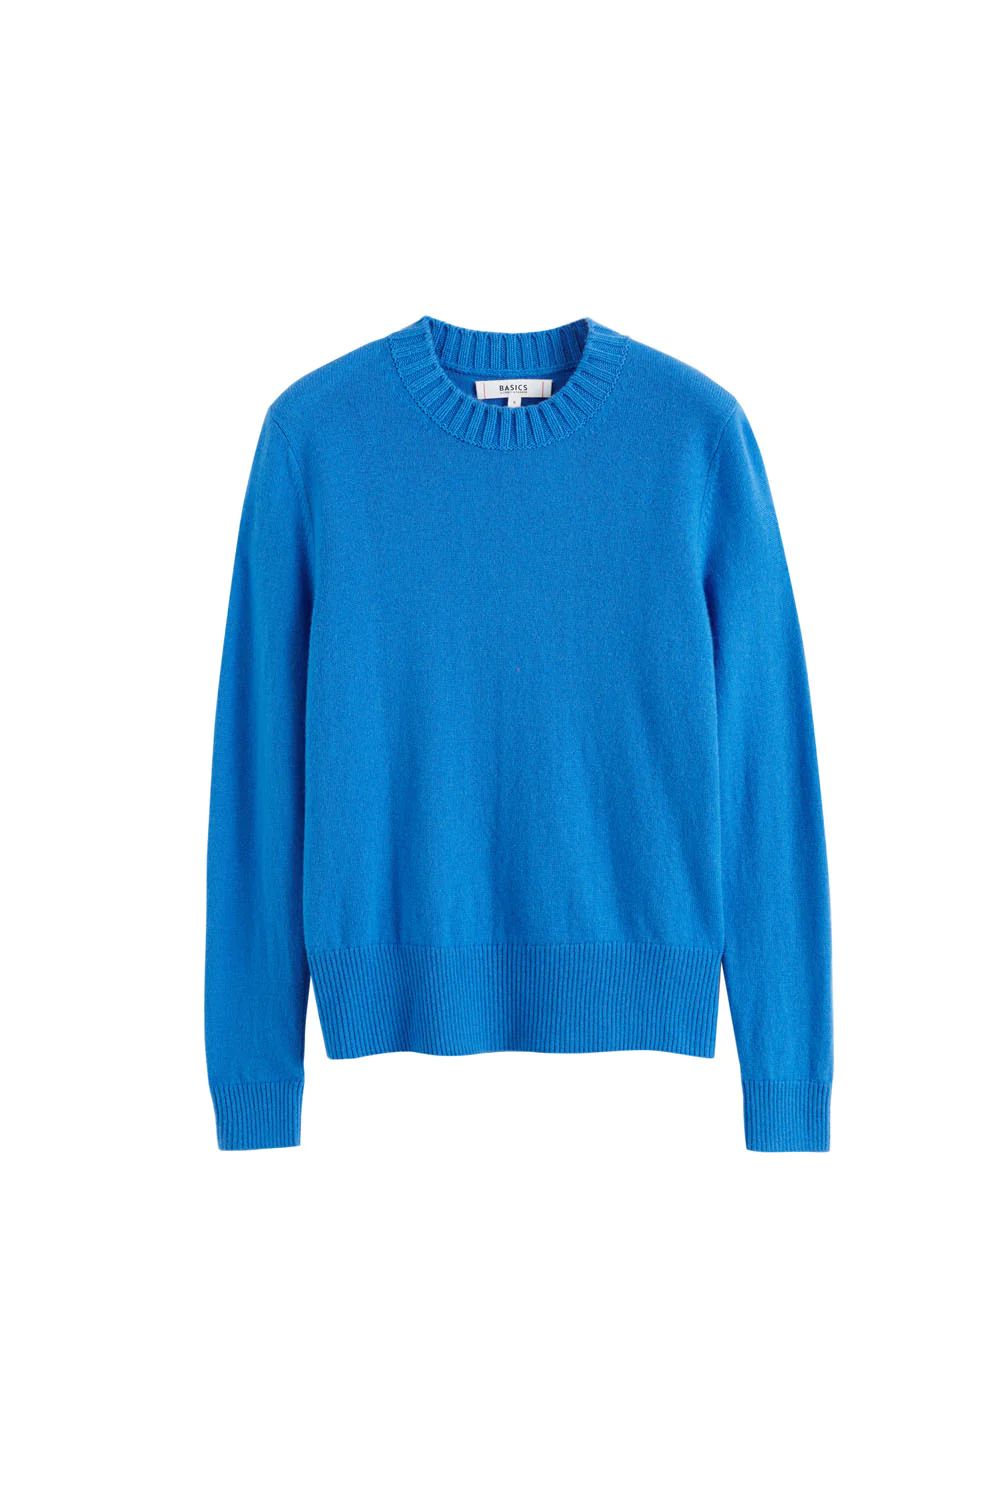 Denim-Blue Wool-Cashmere Cropped Sweater | Chinti and Parker